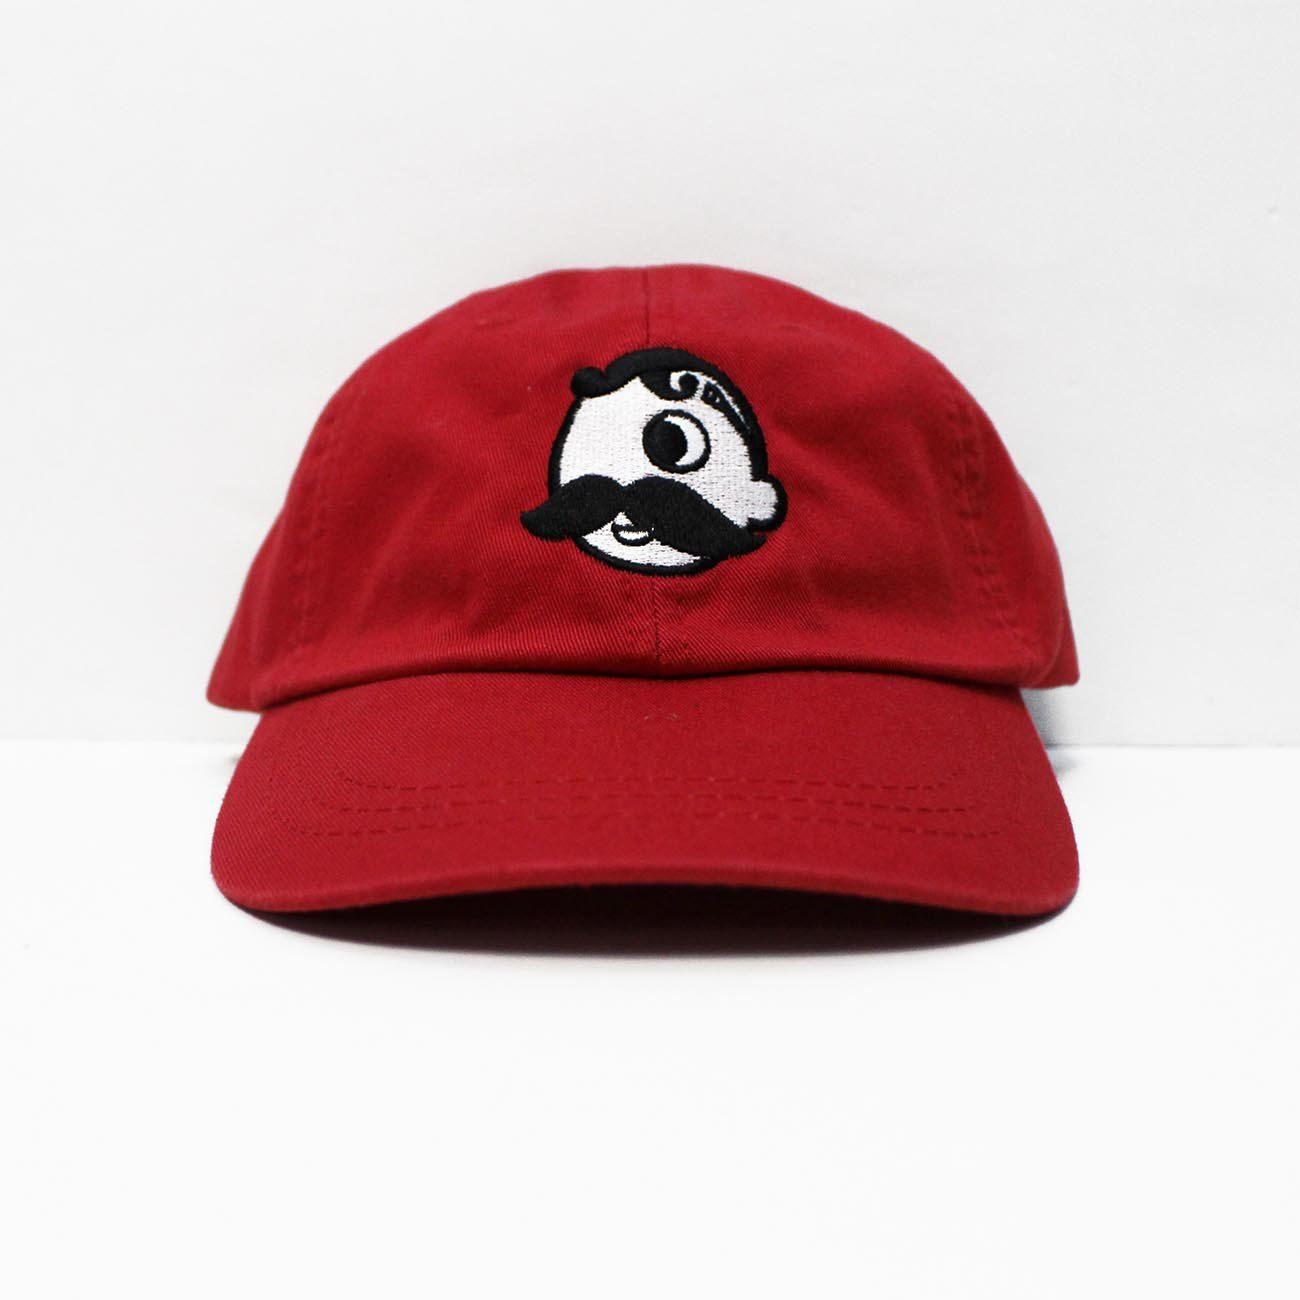 Natty Boh Logo (Red) / Baseball Hat - Route One Apparel